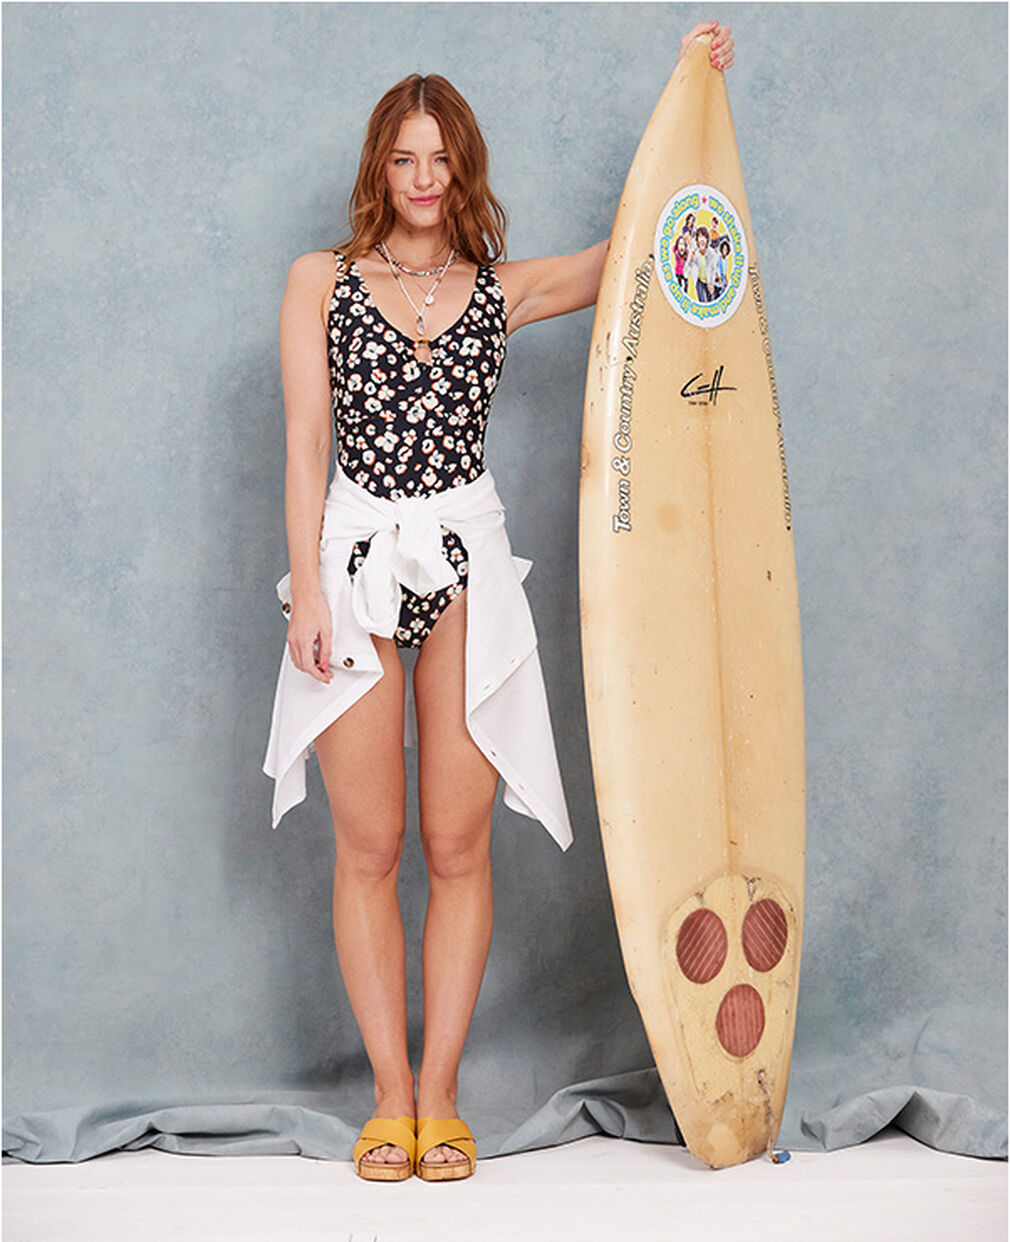 A woman stands next to a surfboard. She wears a black floral swimming costume with a white shirt tied around her waist. She also wears a pair of yellow sandals.